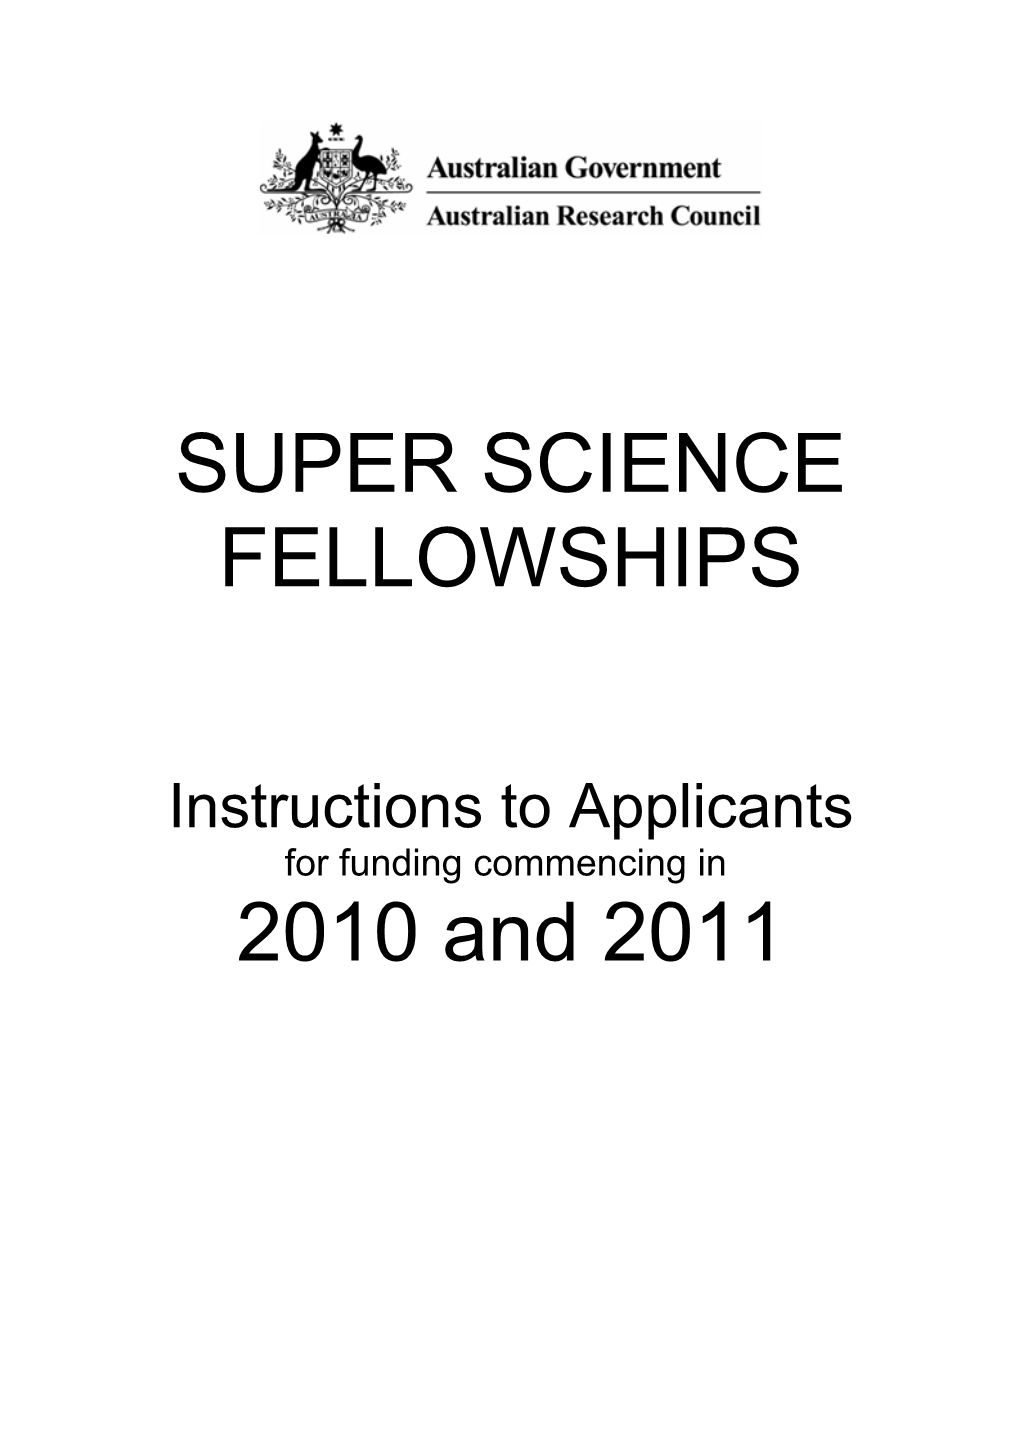 Super Science Fellowships Instructions to Applicants - for Funding Commencing in 2010 and 2011